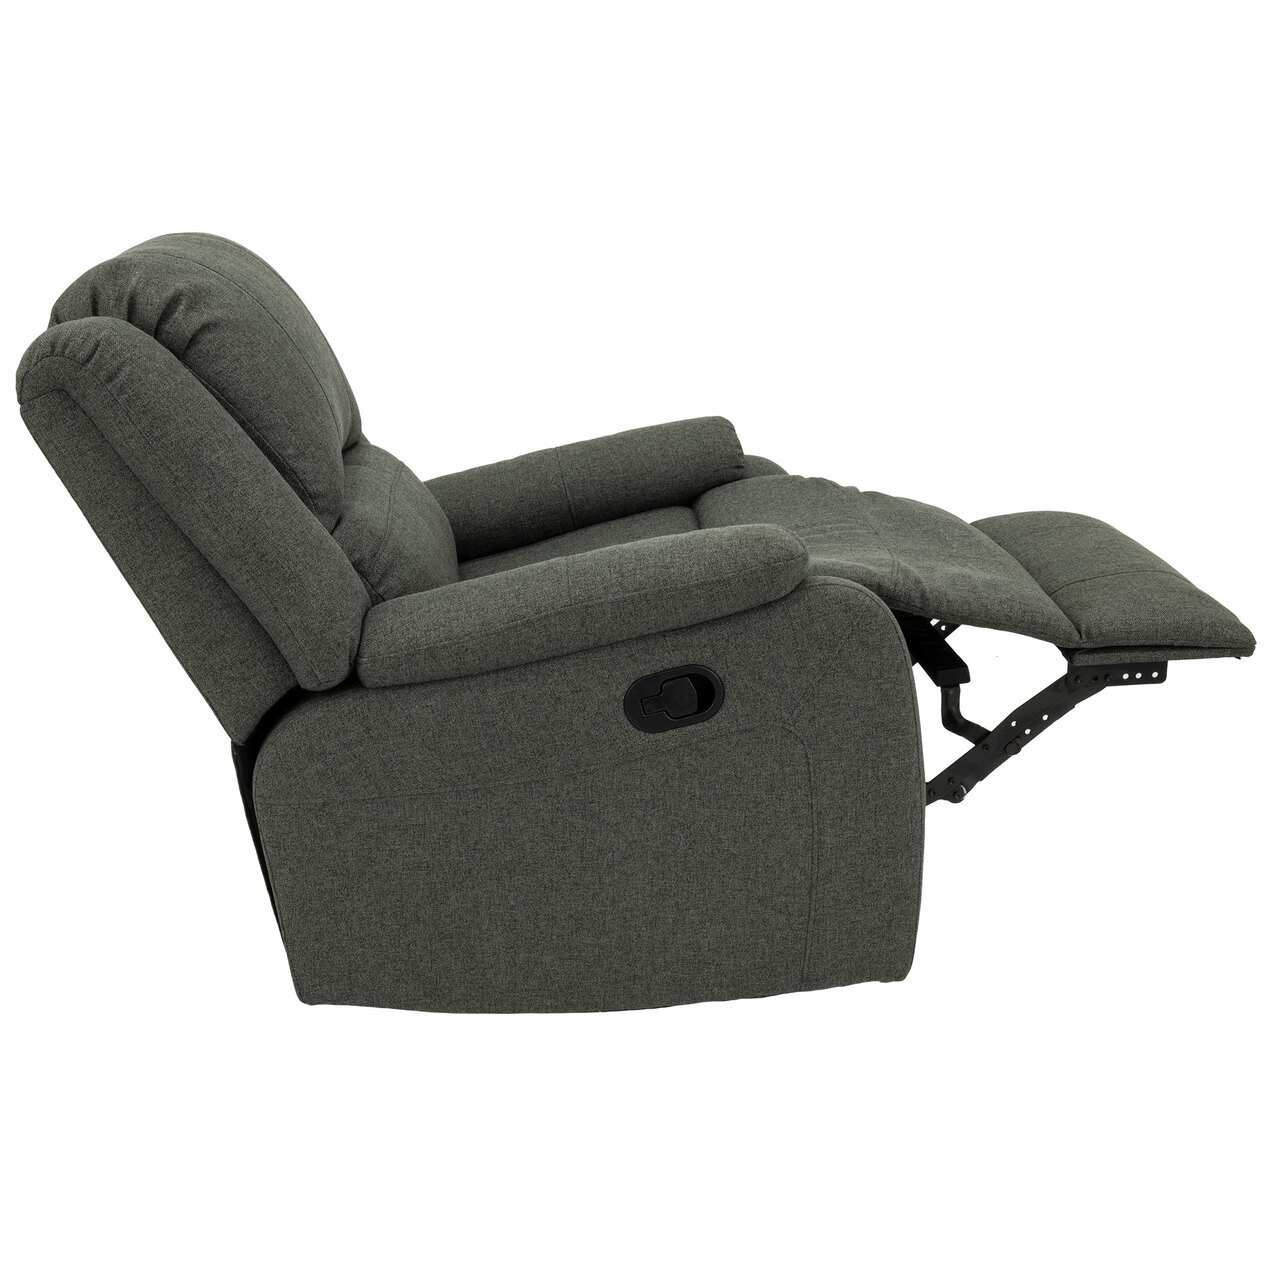 The Best RV Recliners for 2021: Reviews by SmartRVing